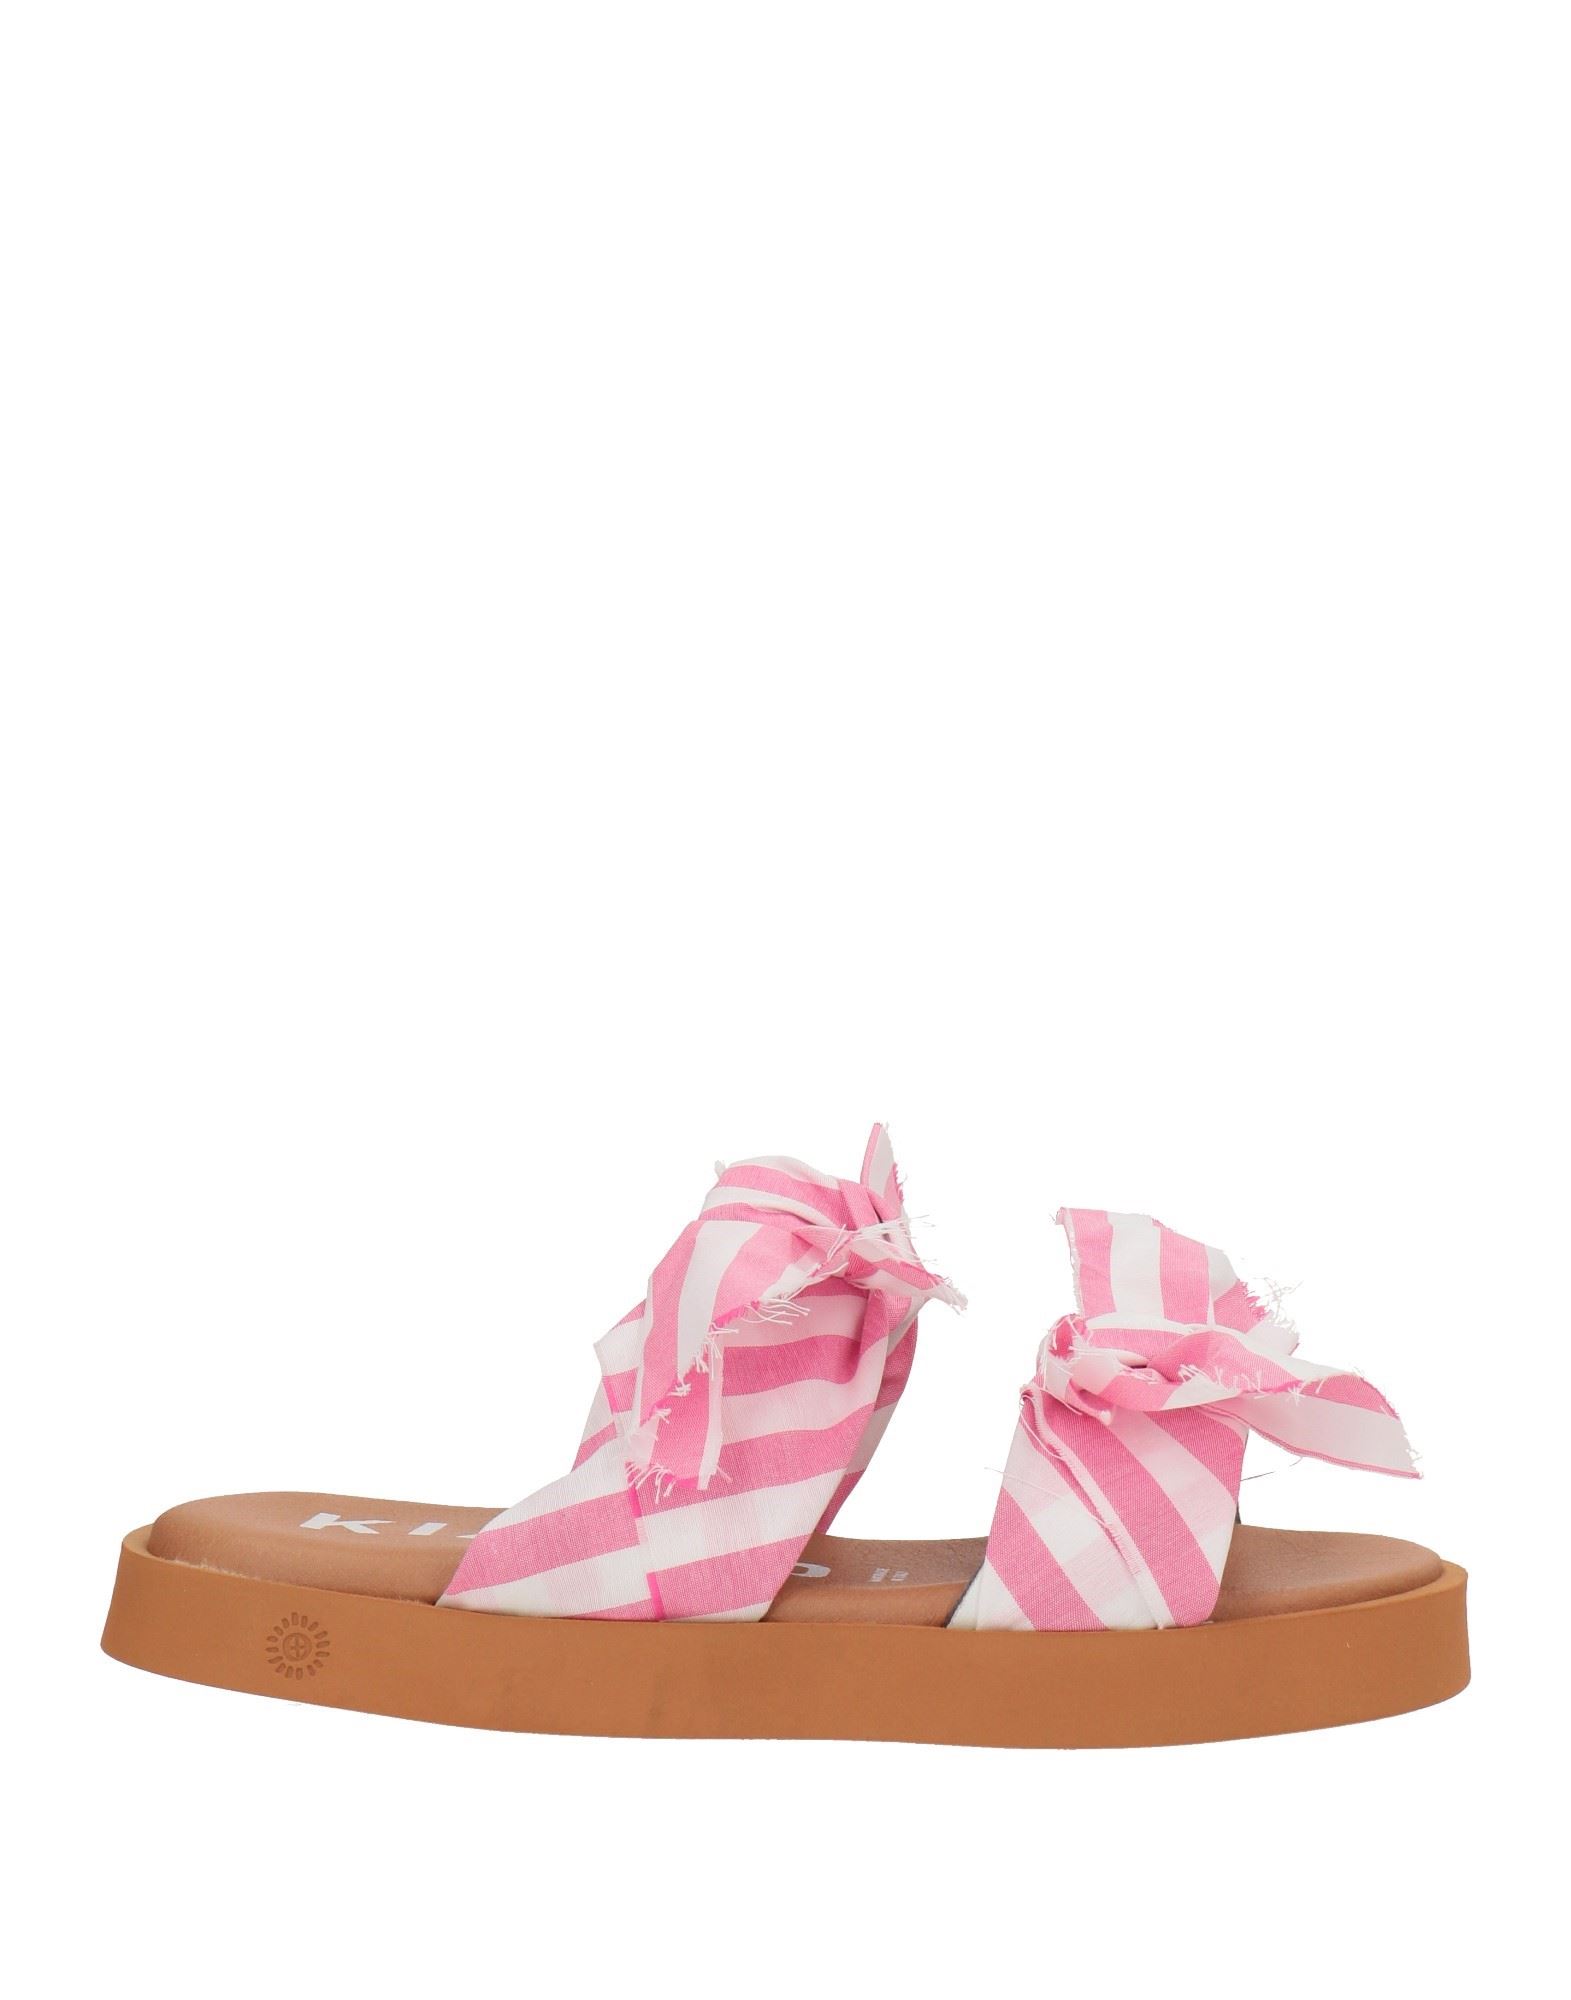 Kianid Sandals In Pink